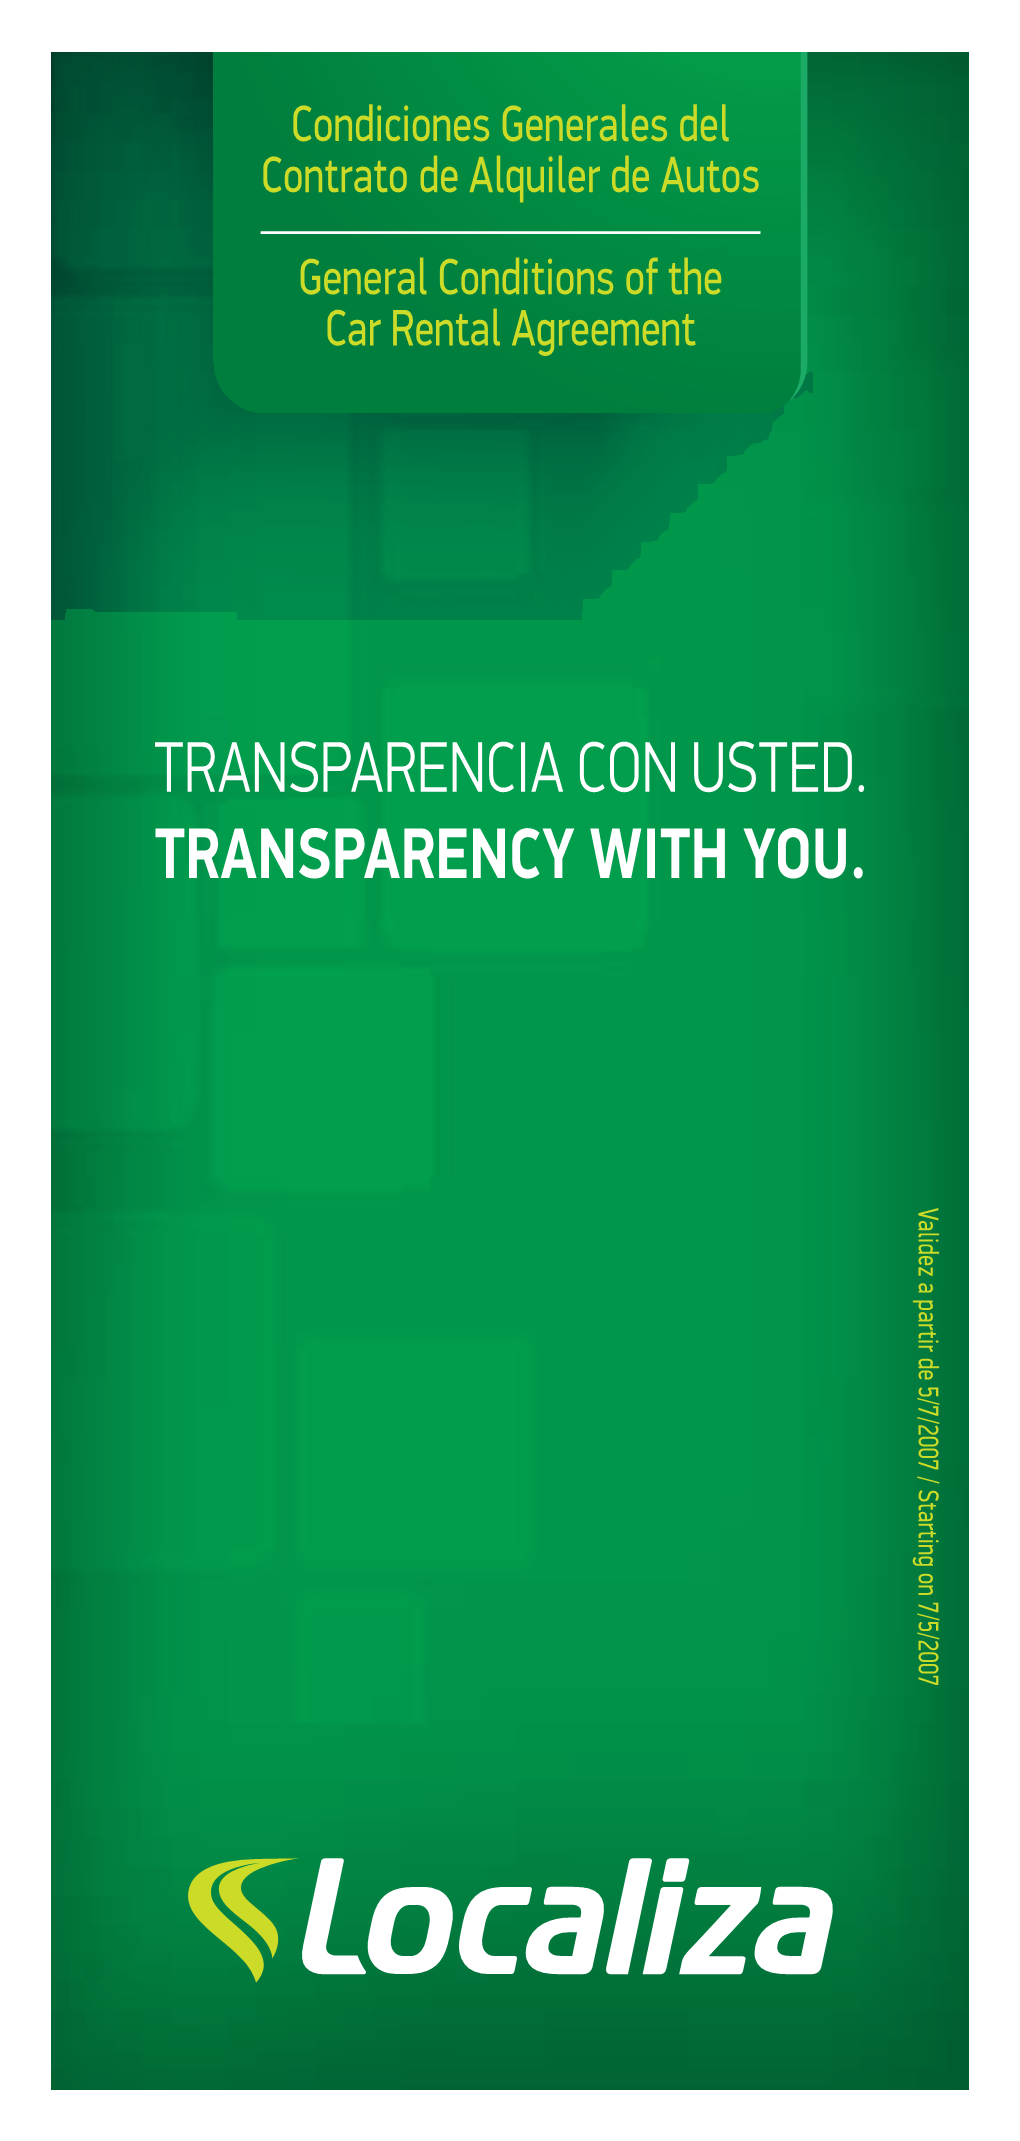 TRANSPARENCIA CON USTED. TRANSPARENCY with YOU. Validez a Partir De 5/7/2007 / Starting on 7/5/2007